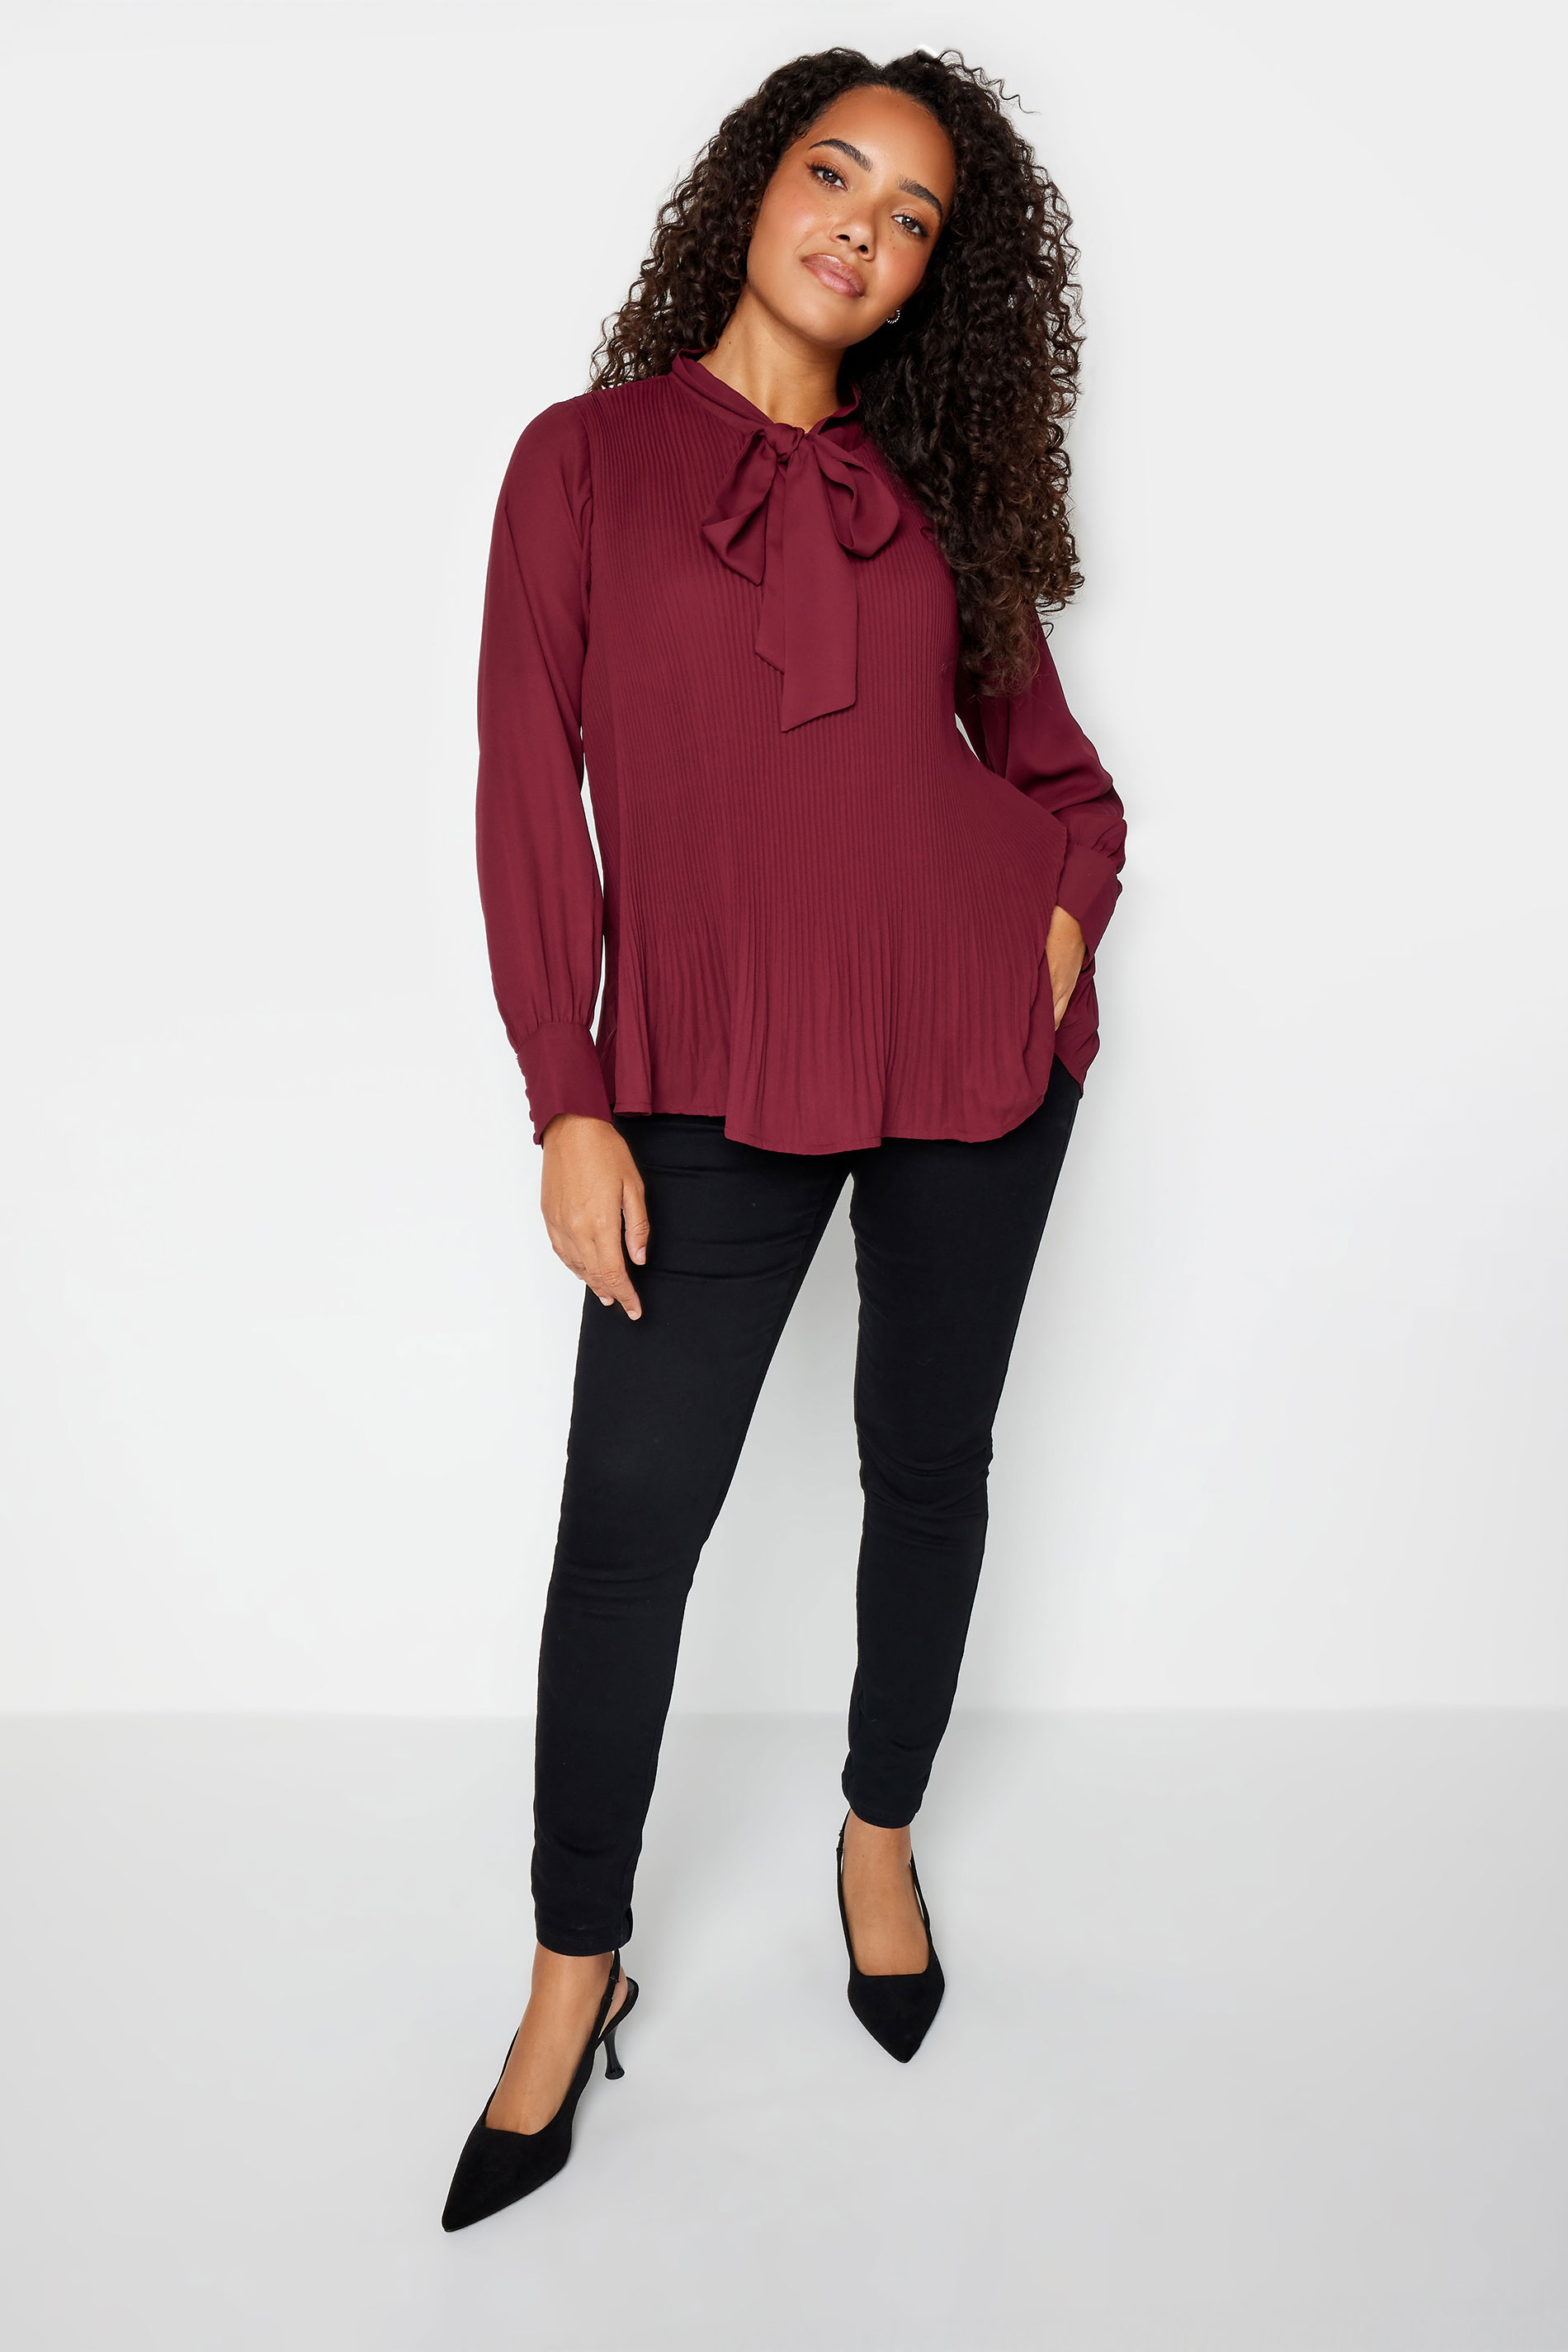 M&Co Burgundy Red Pleated Bow Neck Blouse | M&Co 2